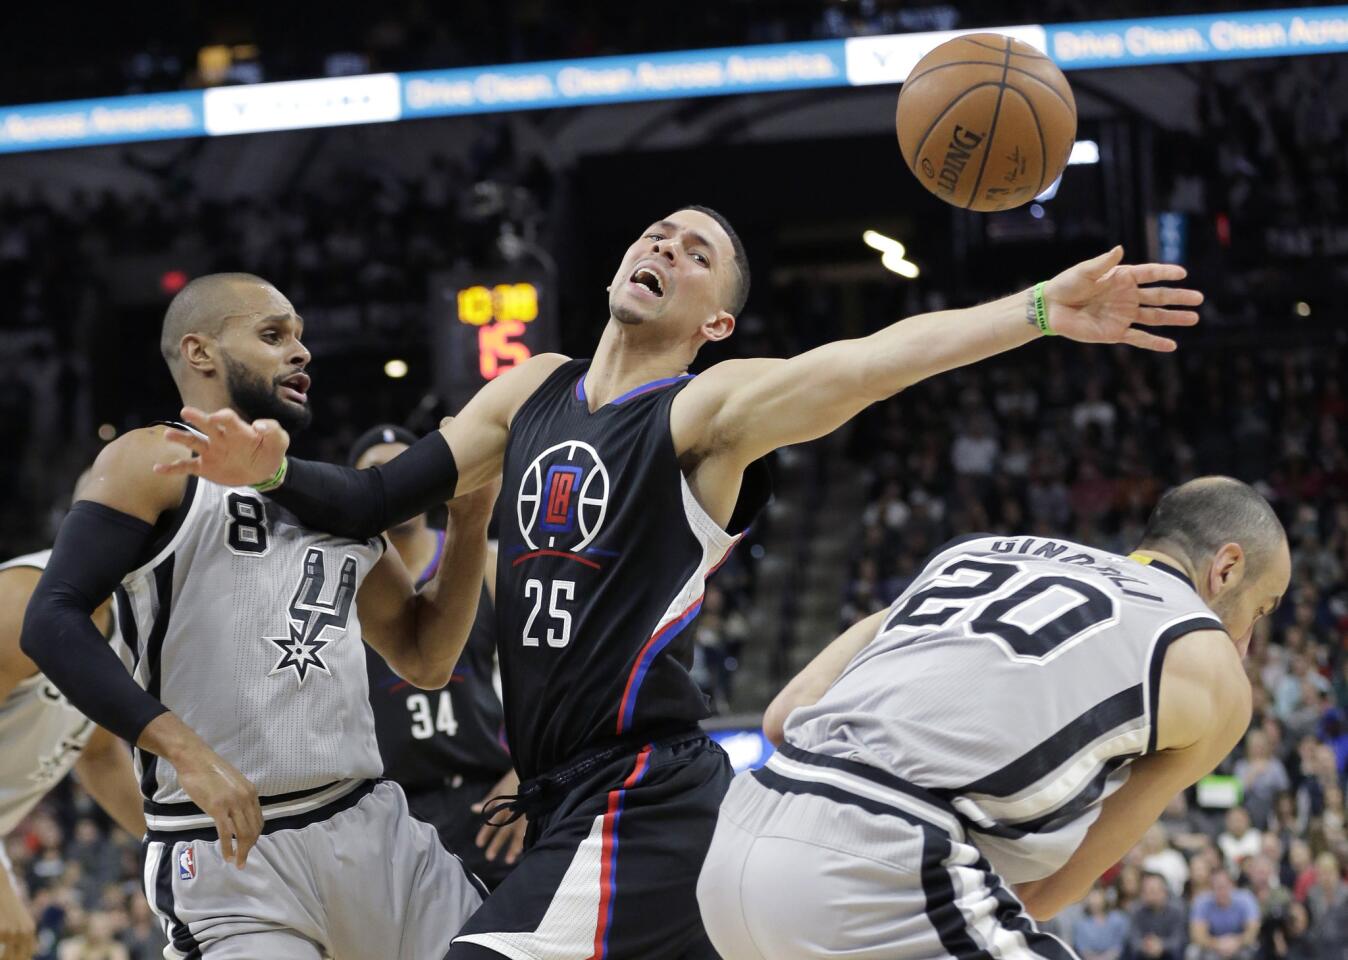 Five take aways from the Clippers' 115-107 loss to the Spurs